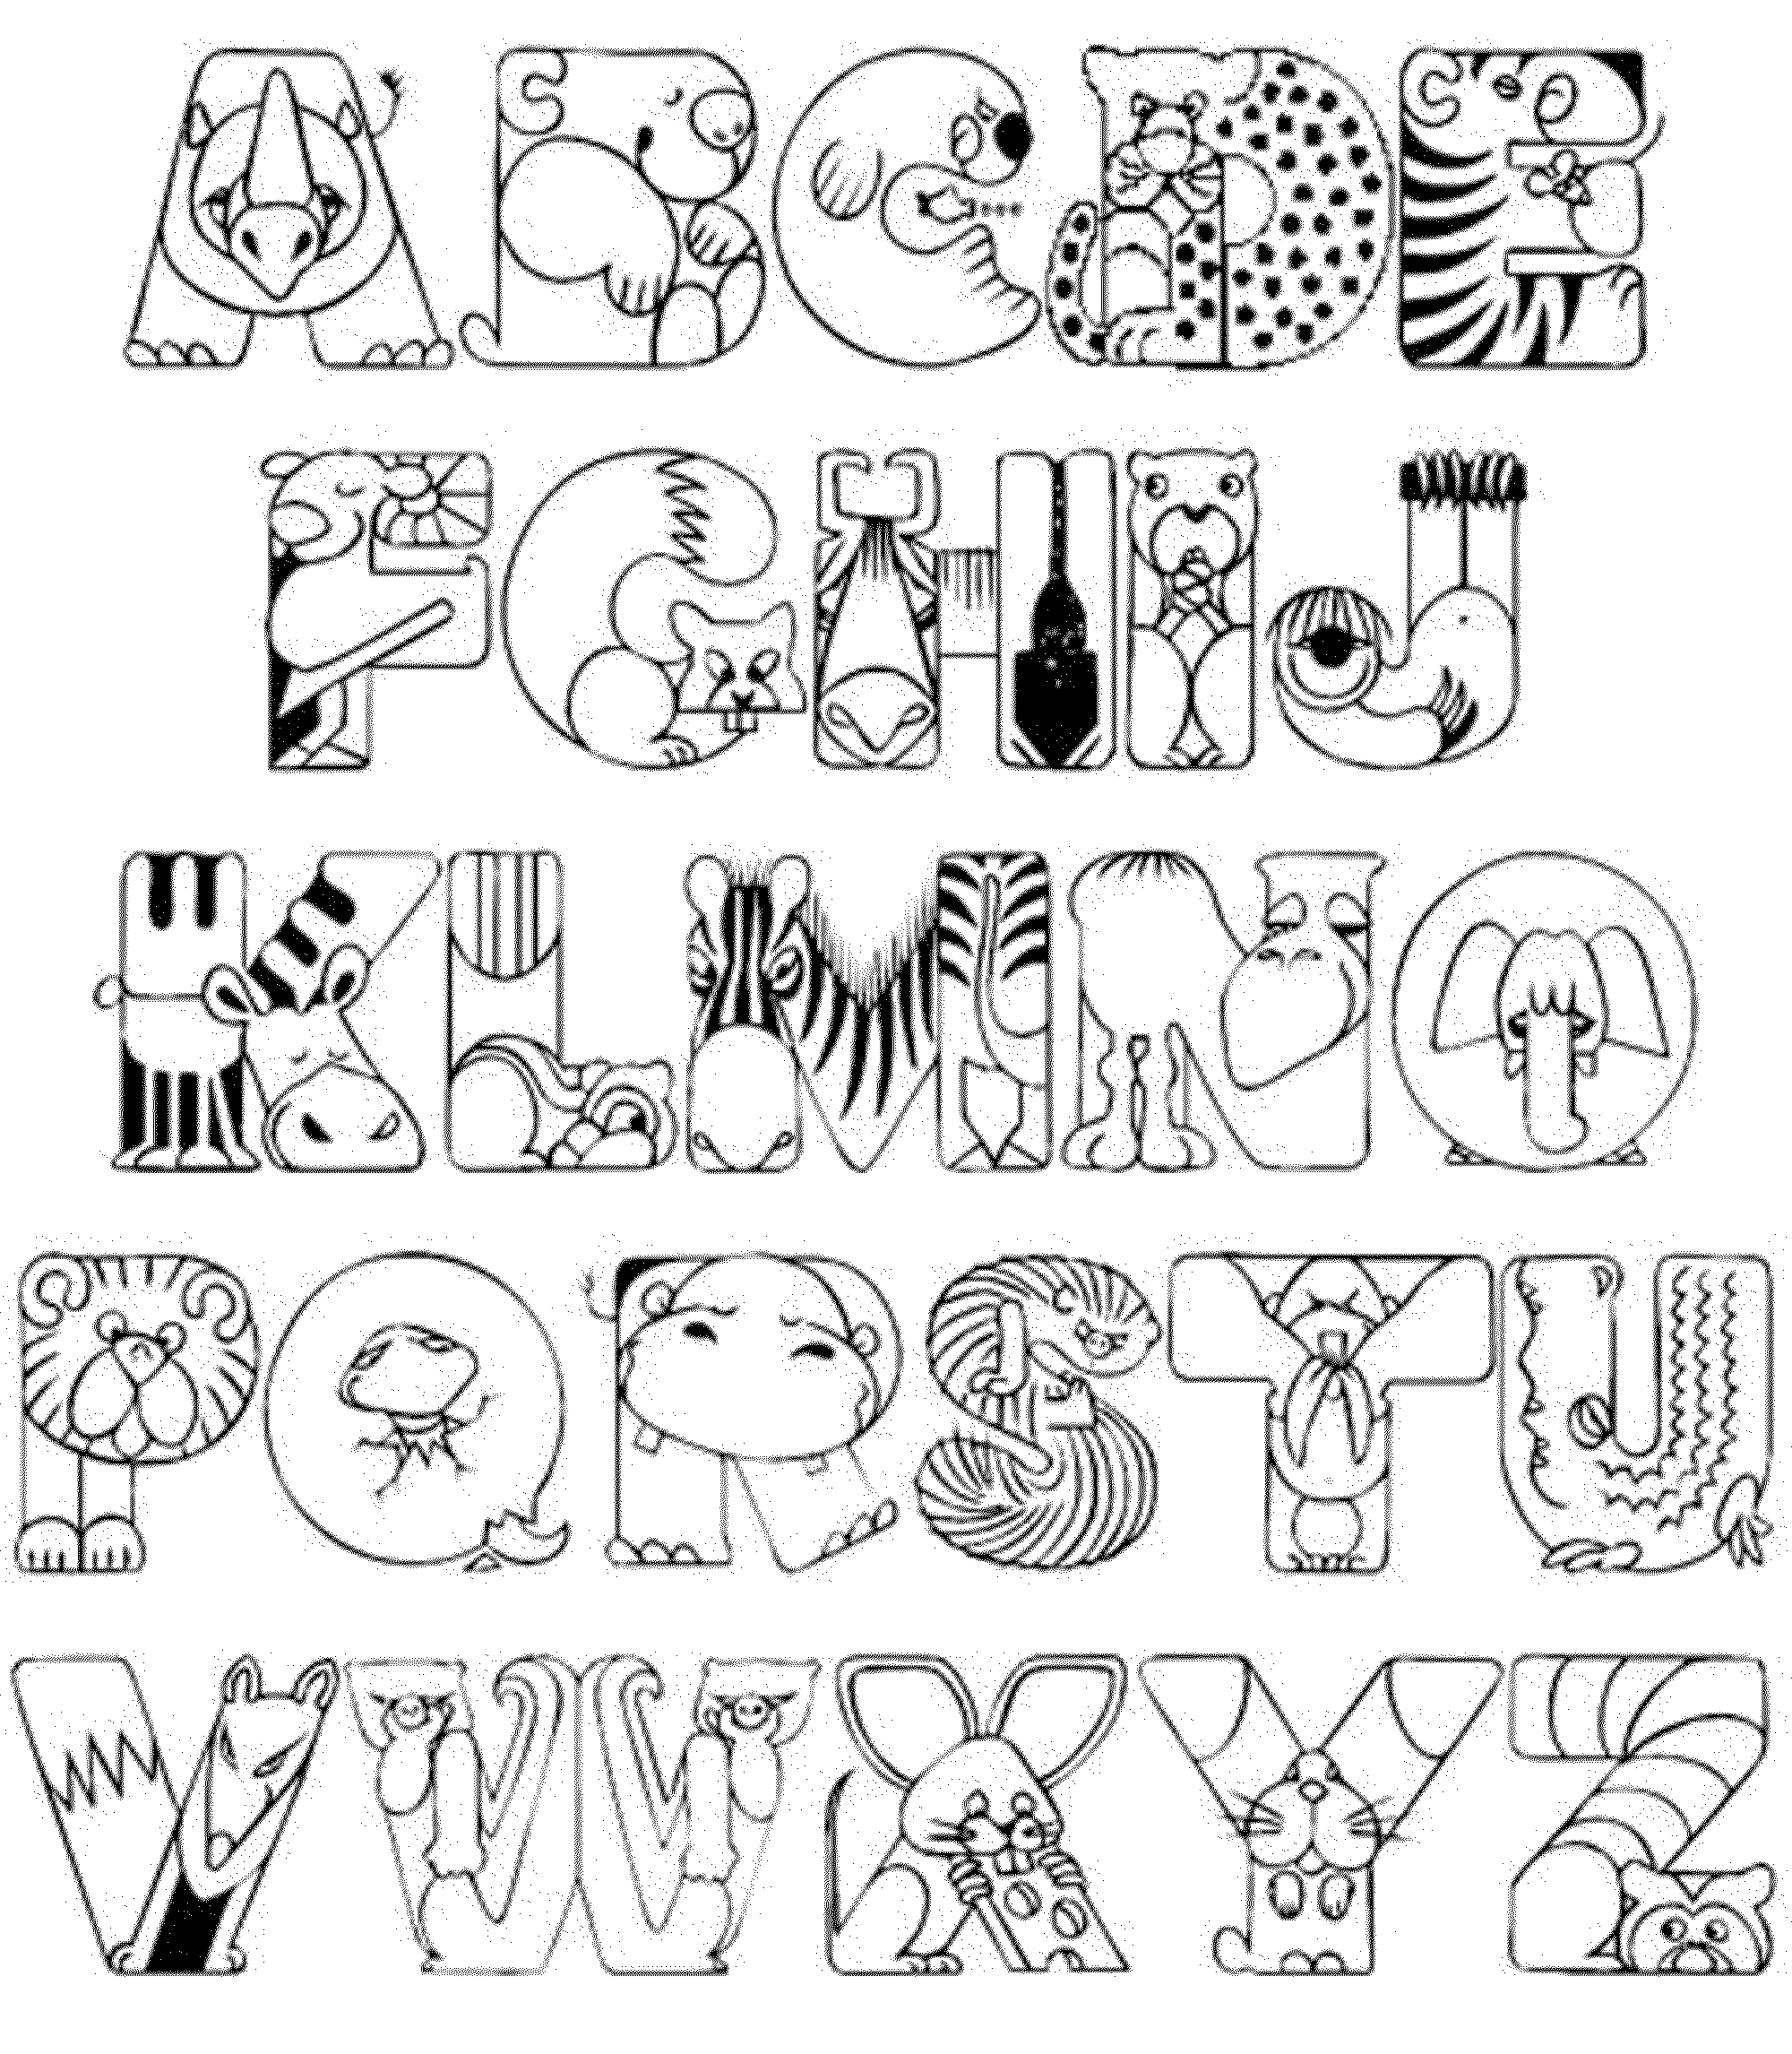 Alphabet Coloring Pages With Animals - High Quality Coloring Pages